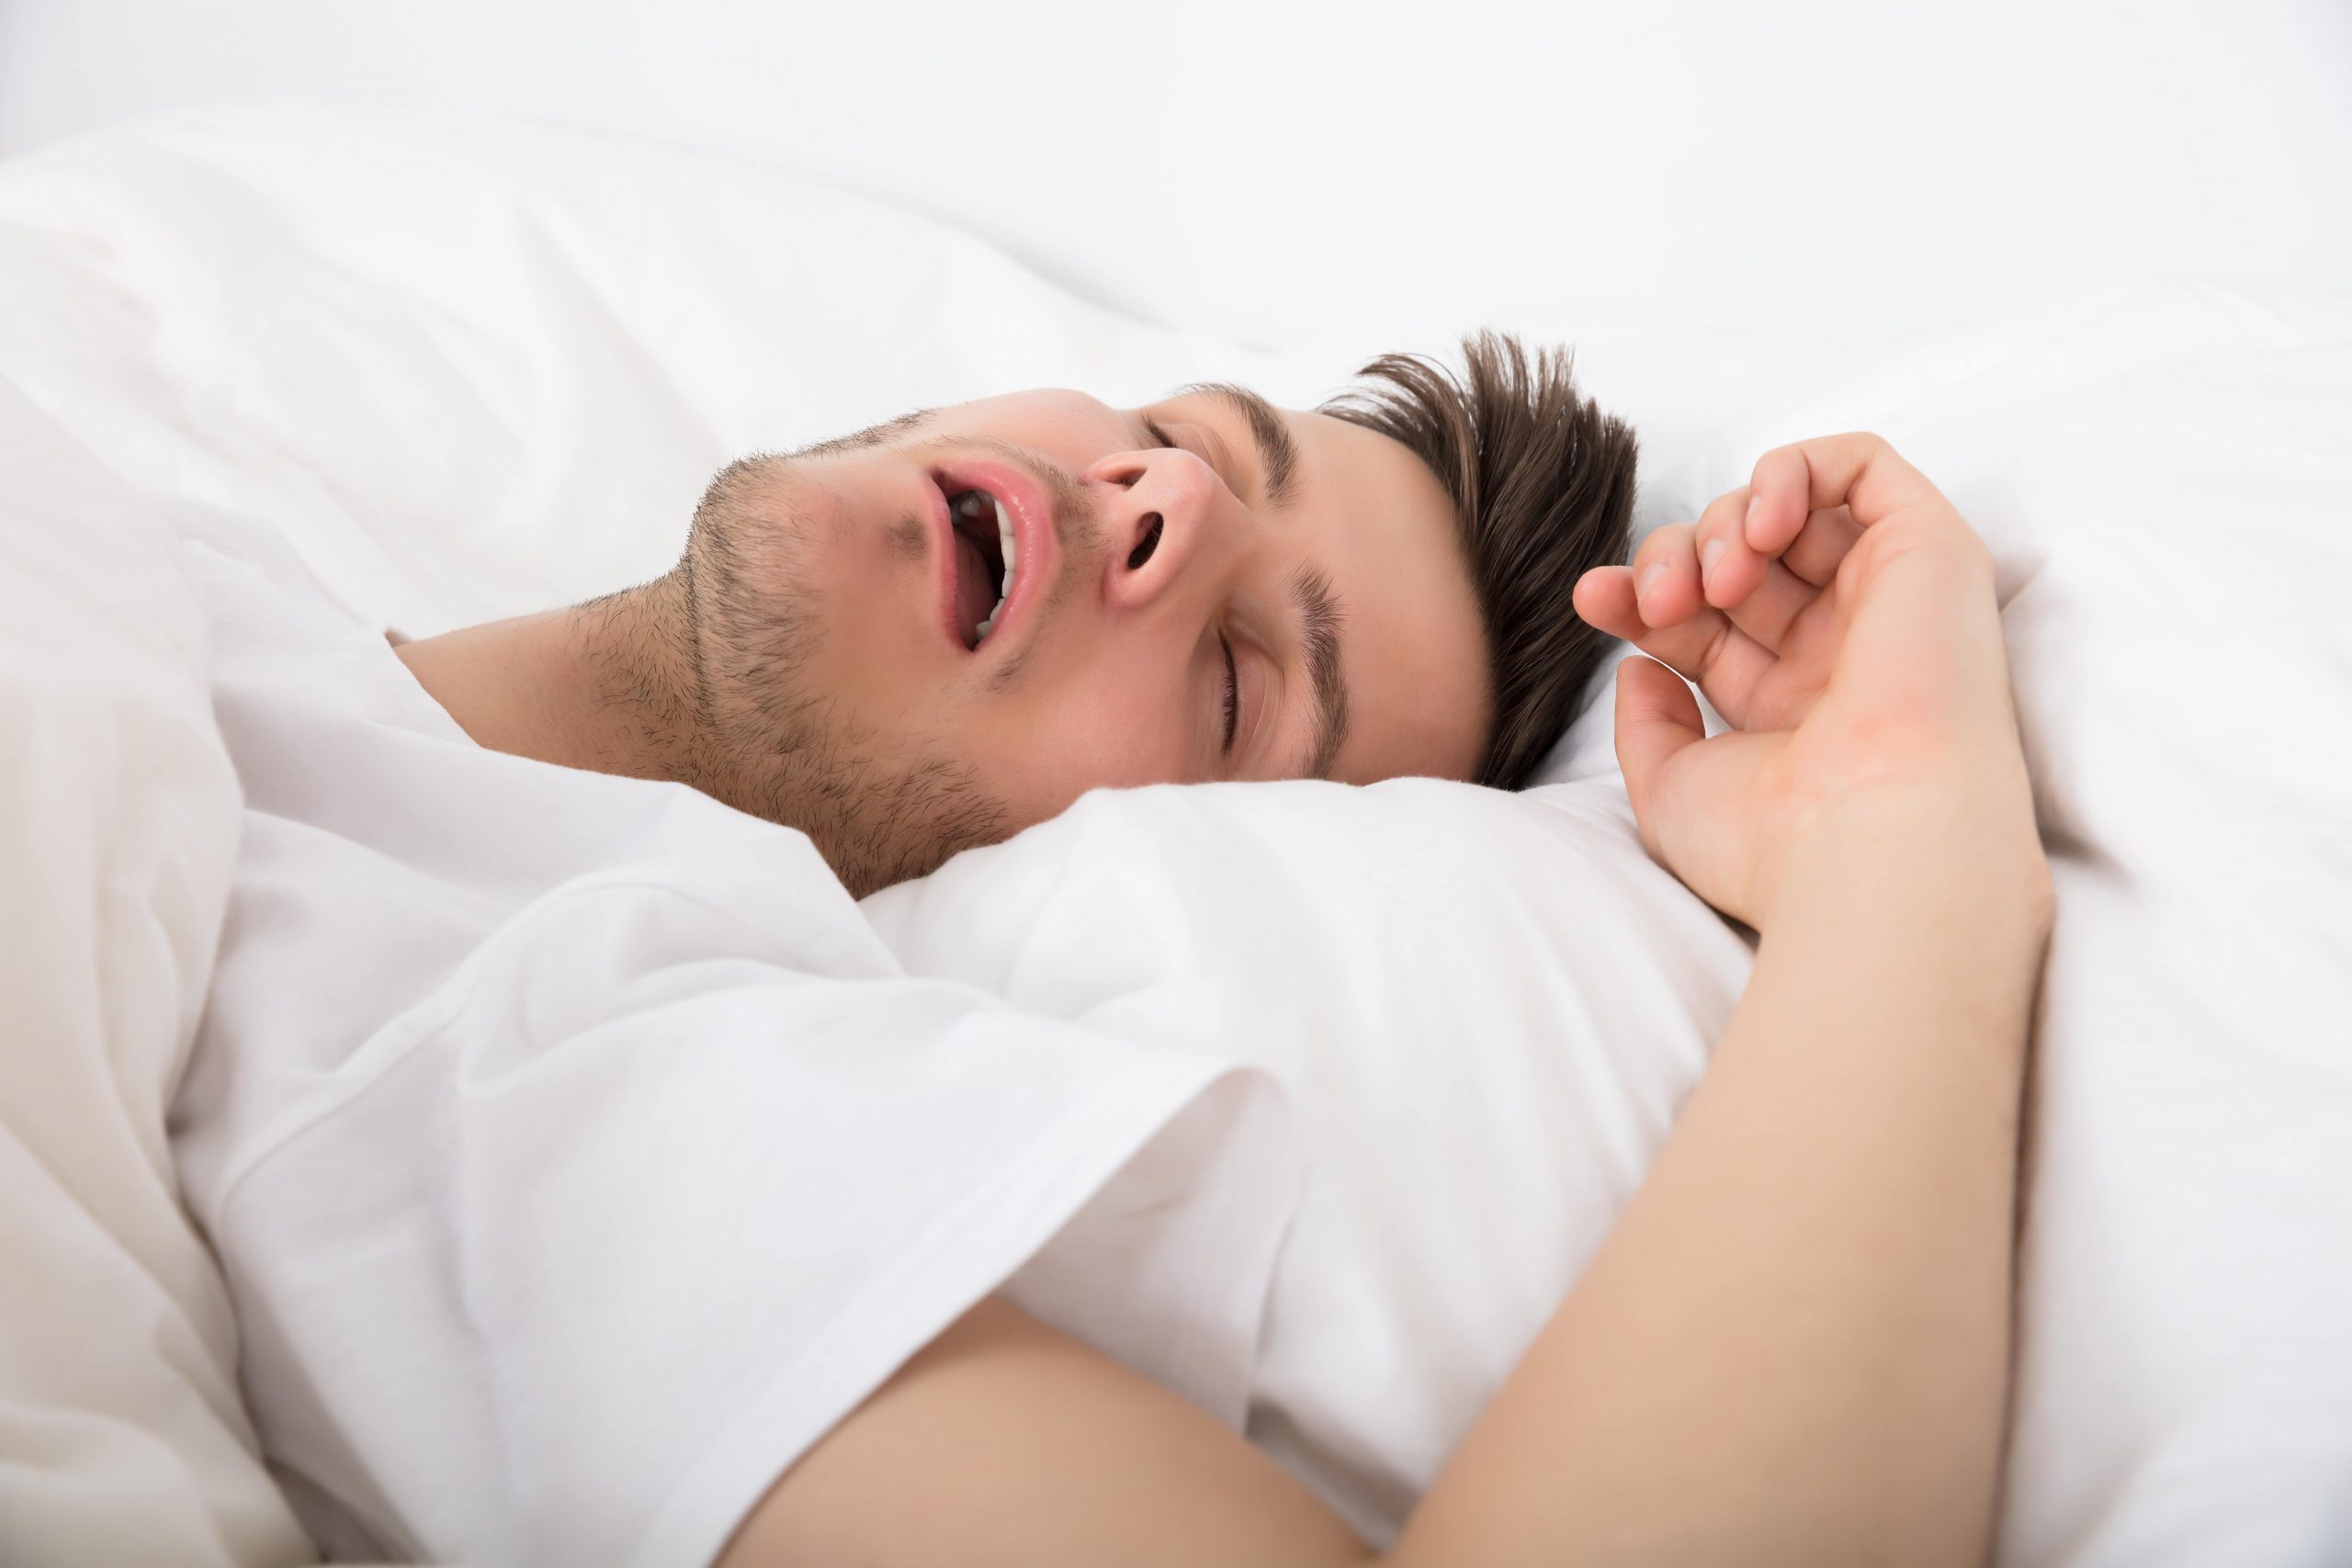 The importance of sleep and steps you can take to increase the quality of your shut eye